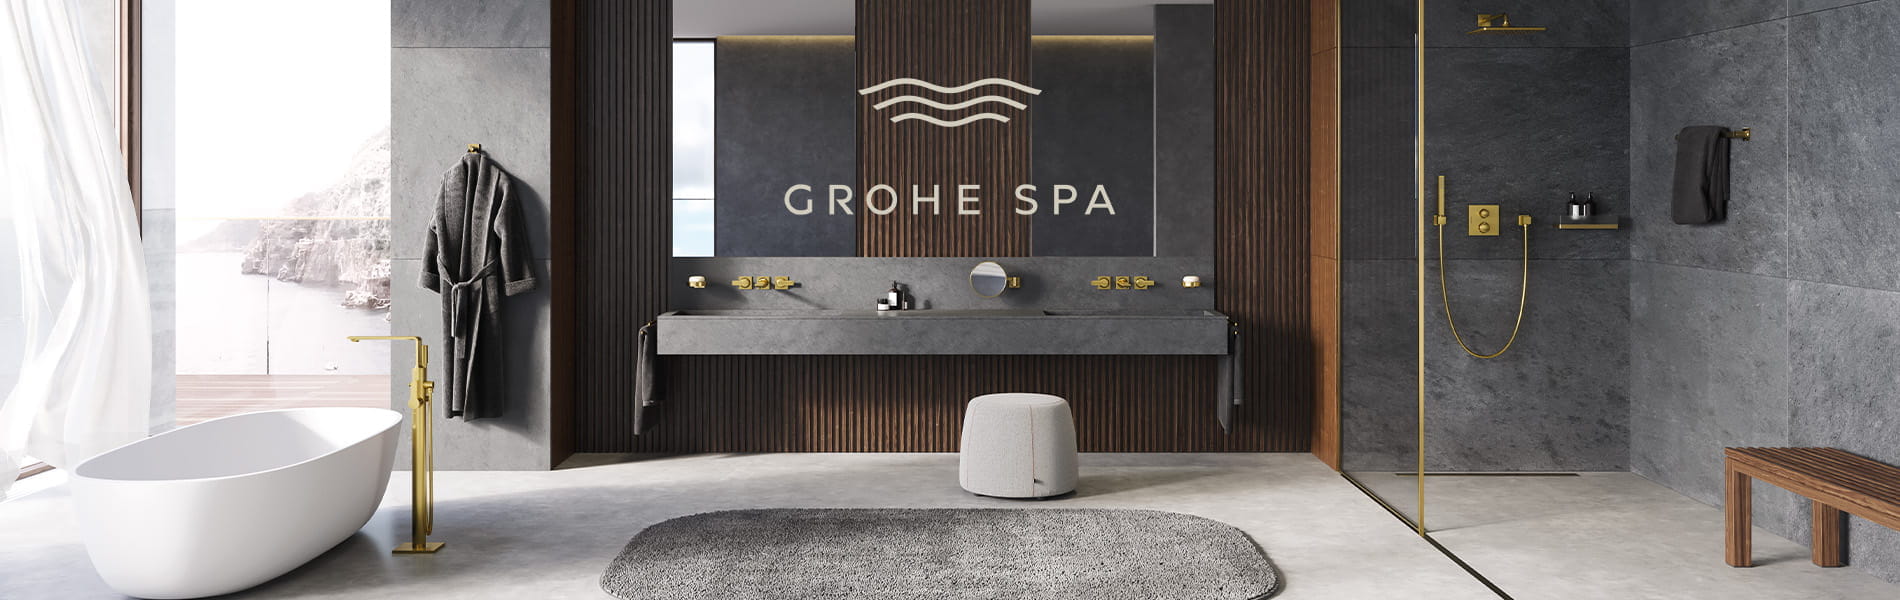 allure grohe spa hero banner image